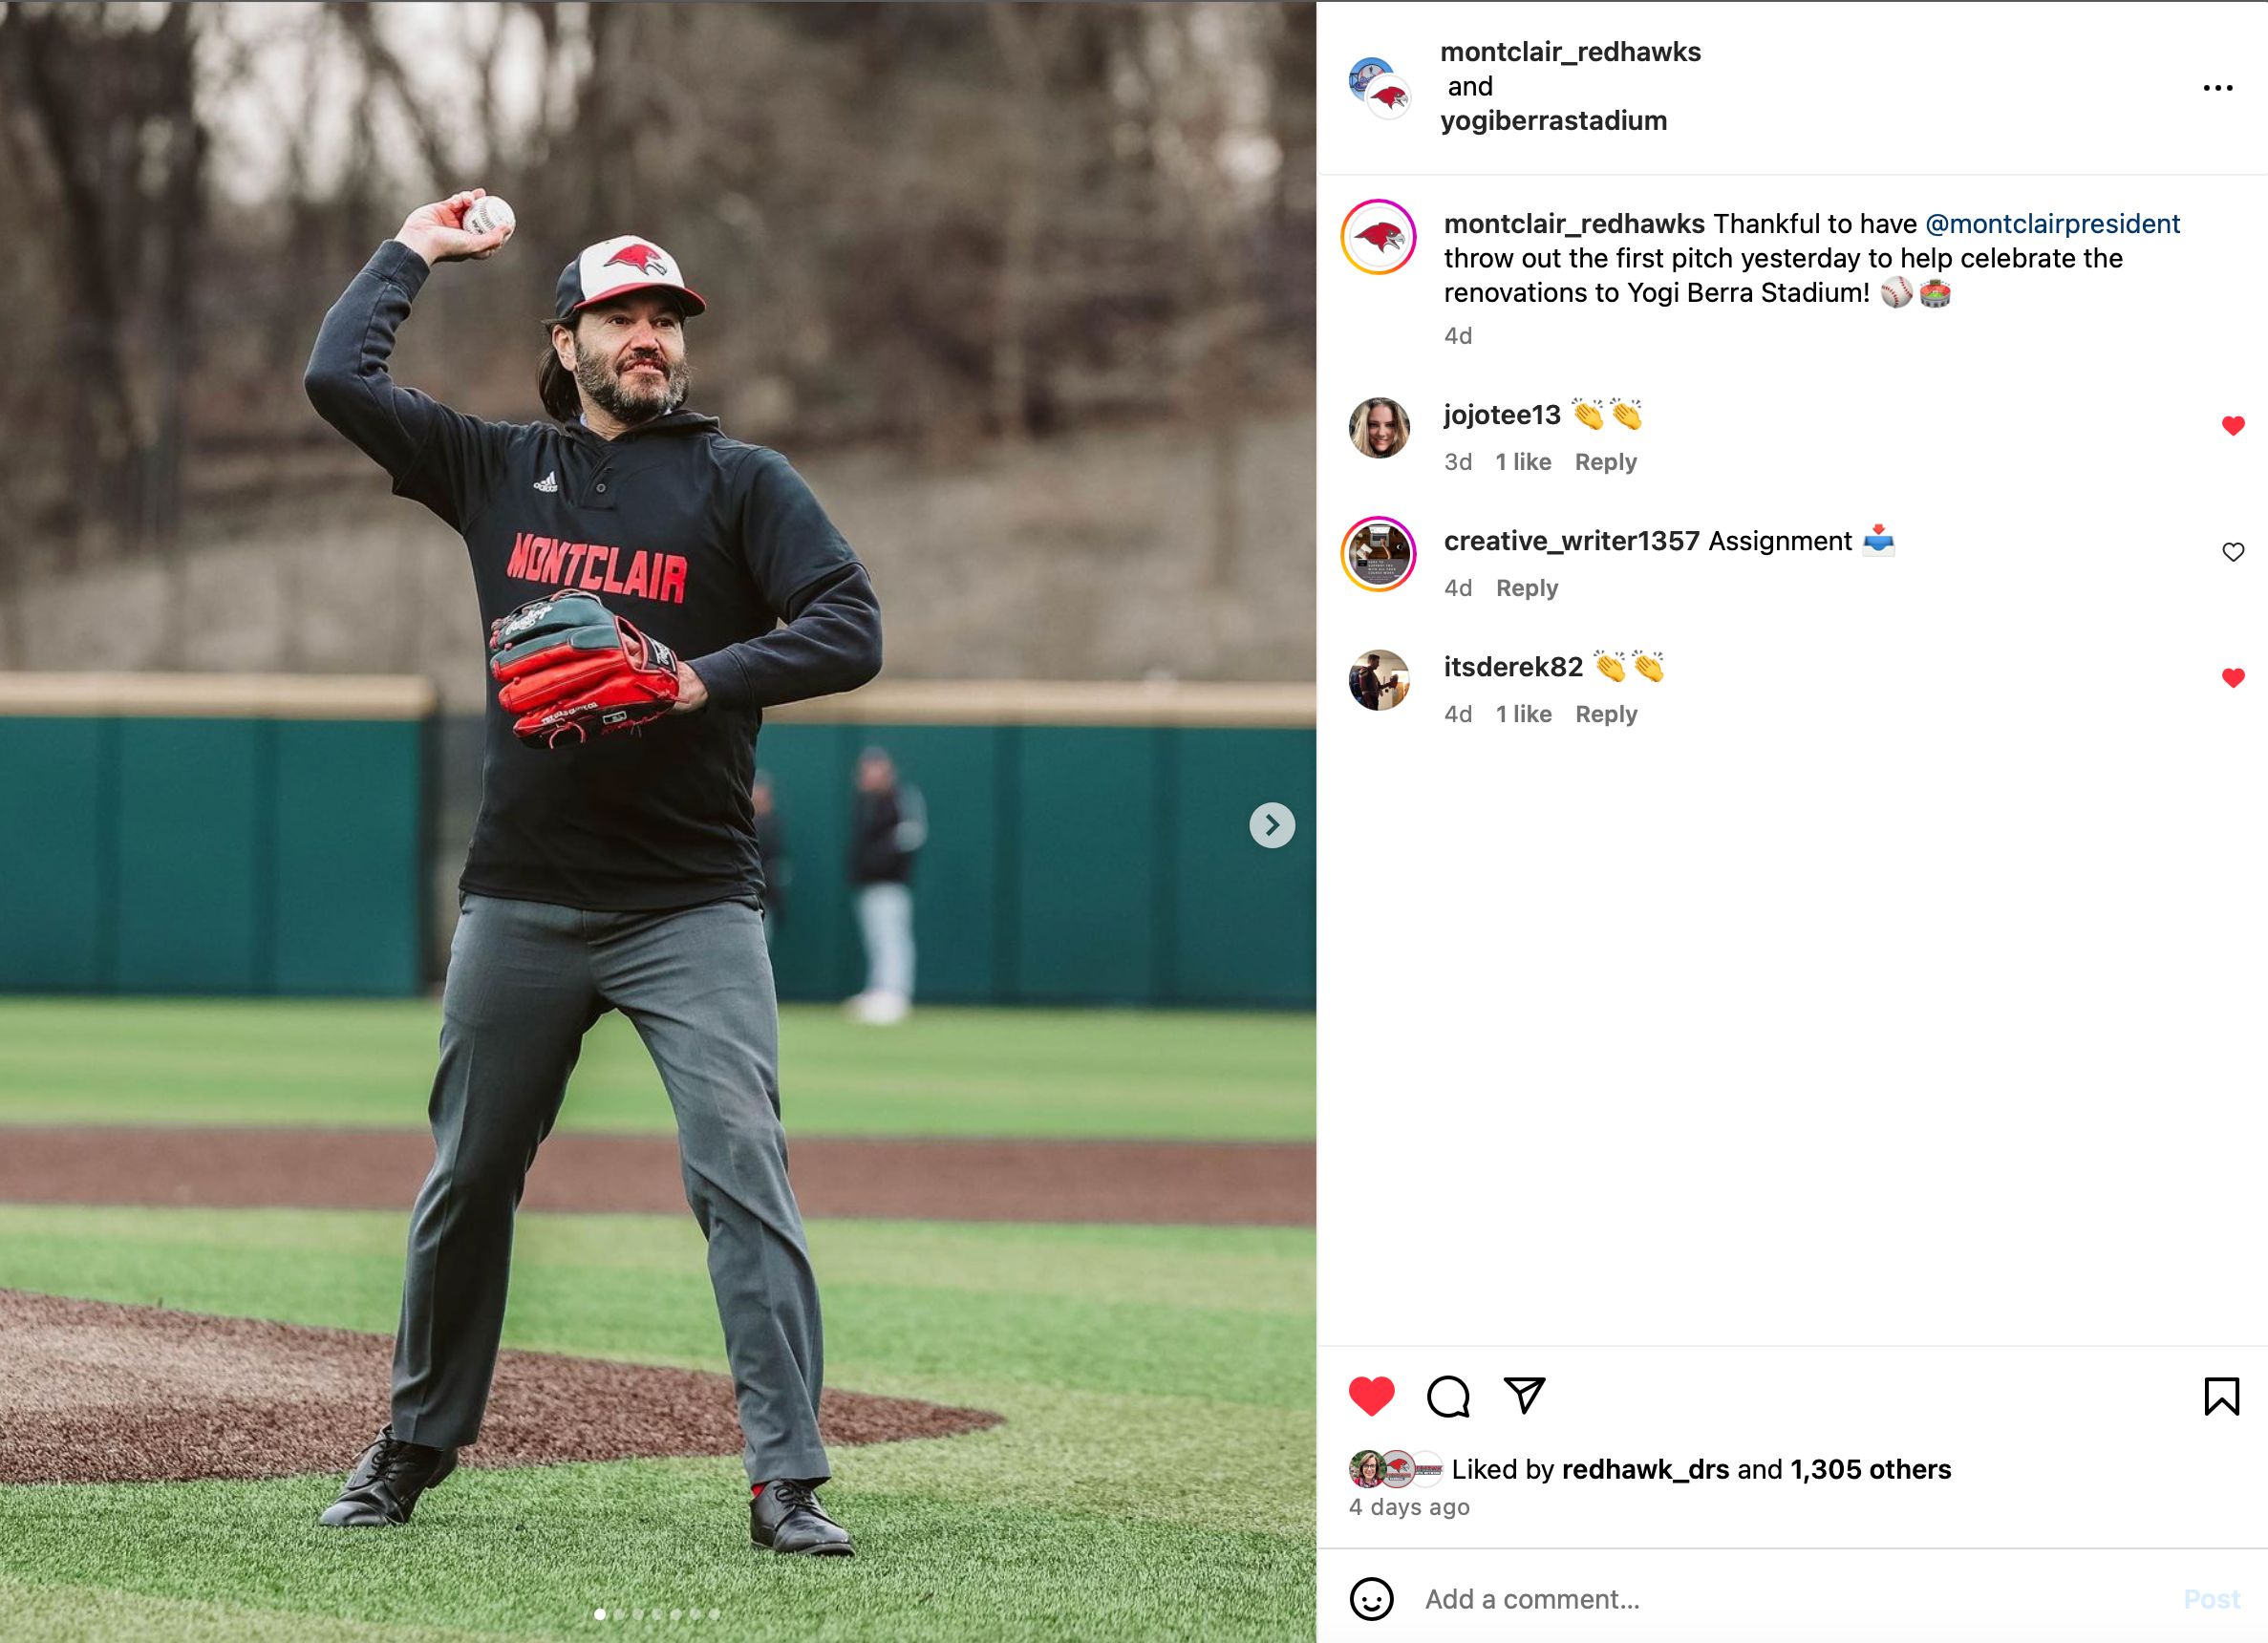 Instagram post of President Koppell throwing out the first pitch